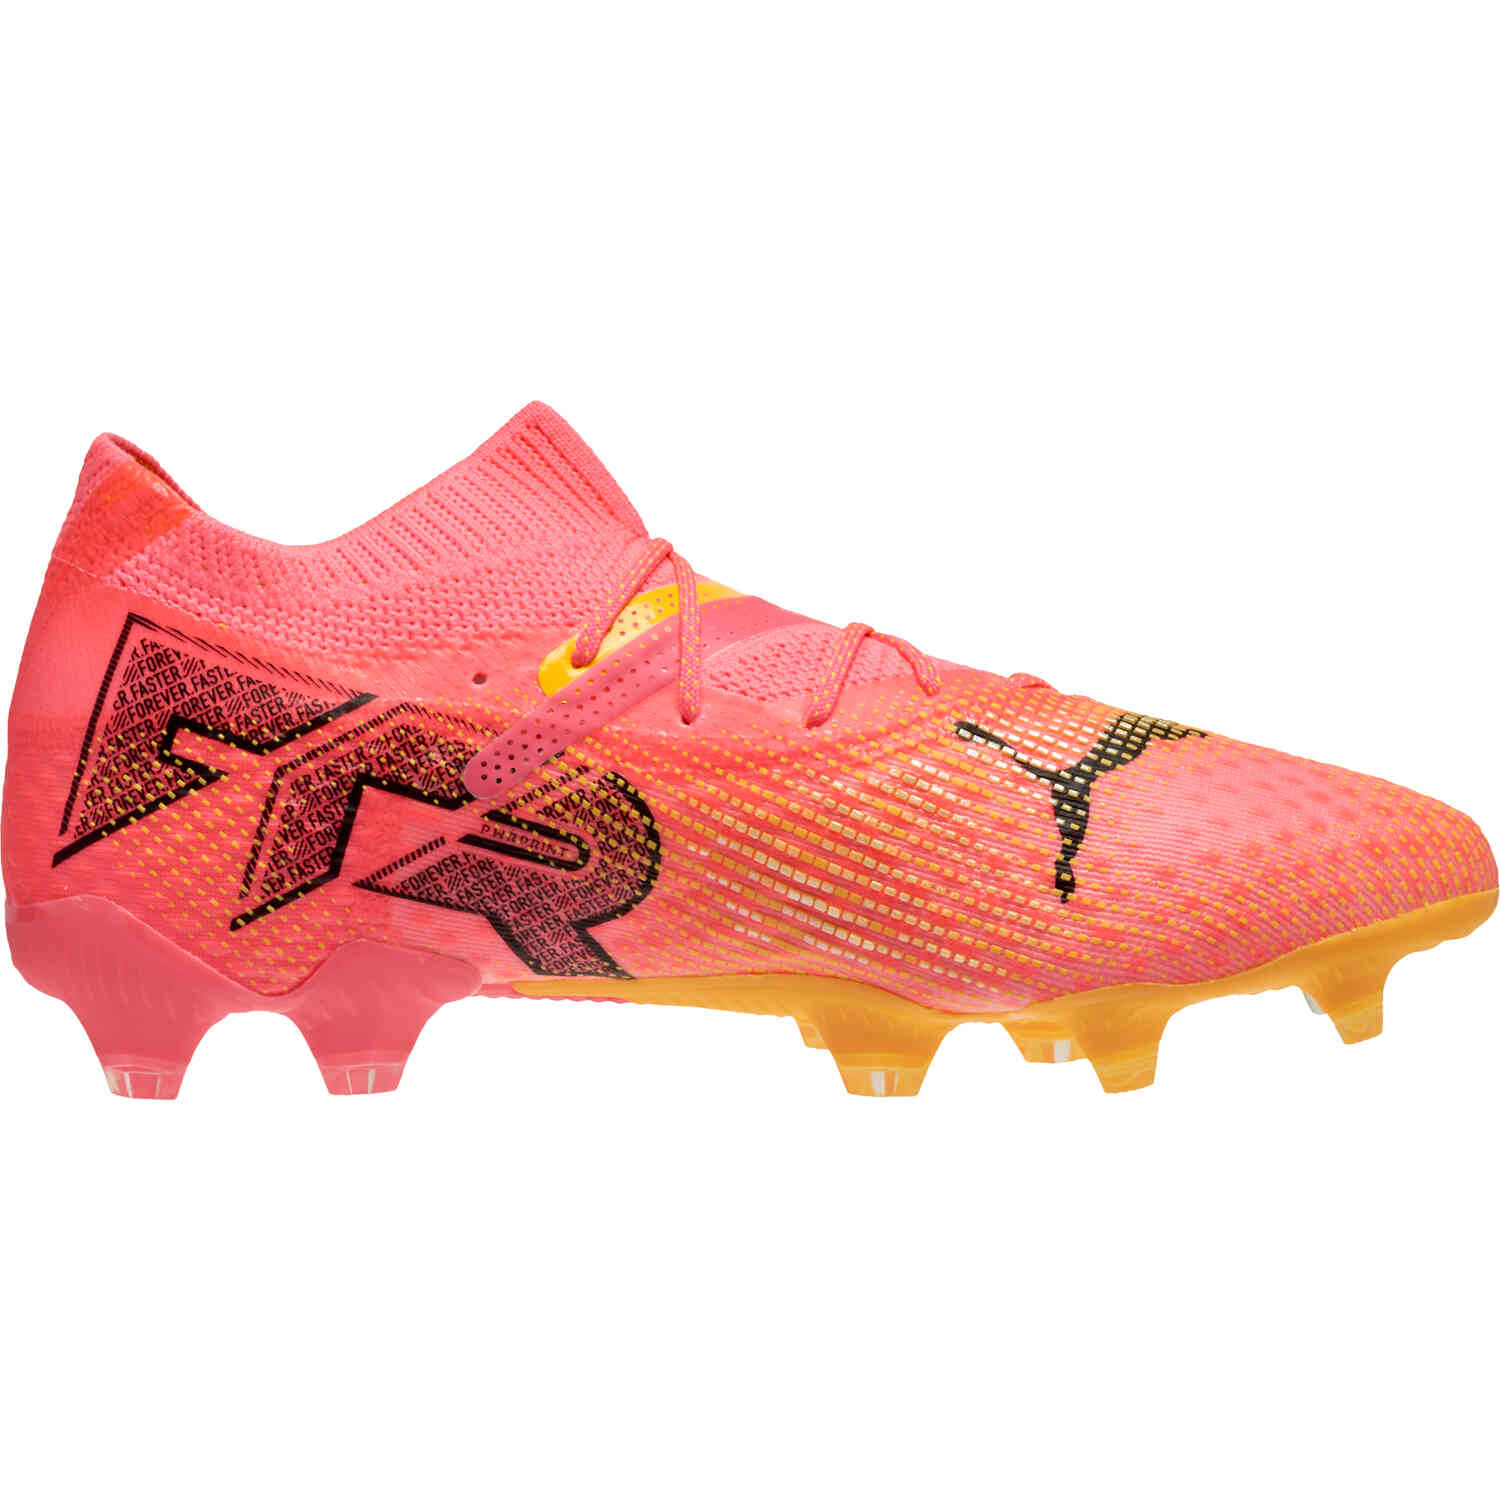 Puma Future 7 Ultimate FG Firm Ground – Forever Faster Pack